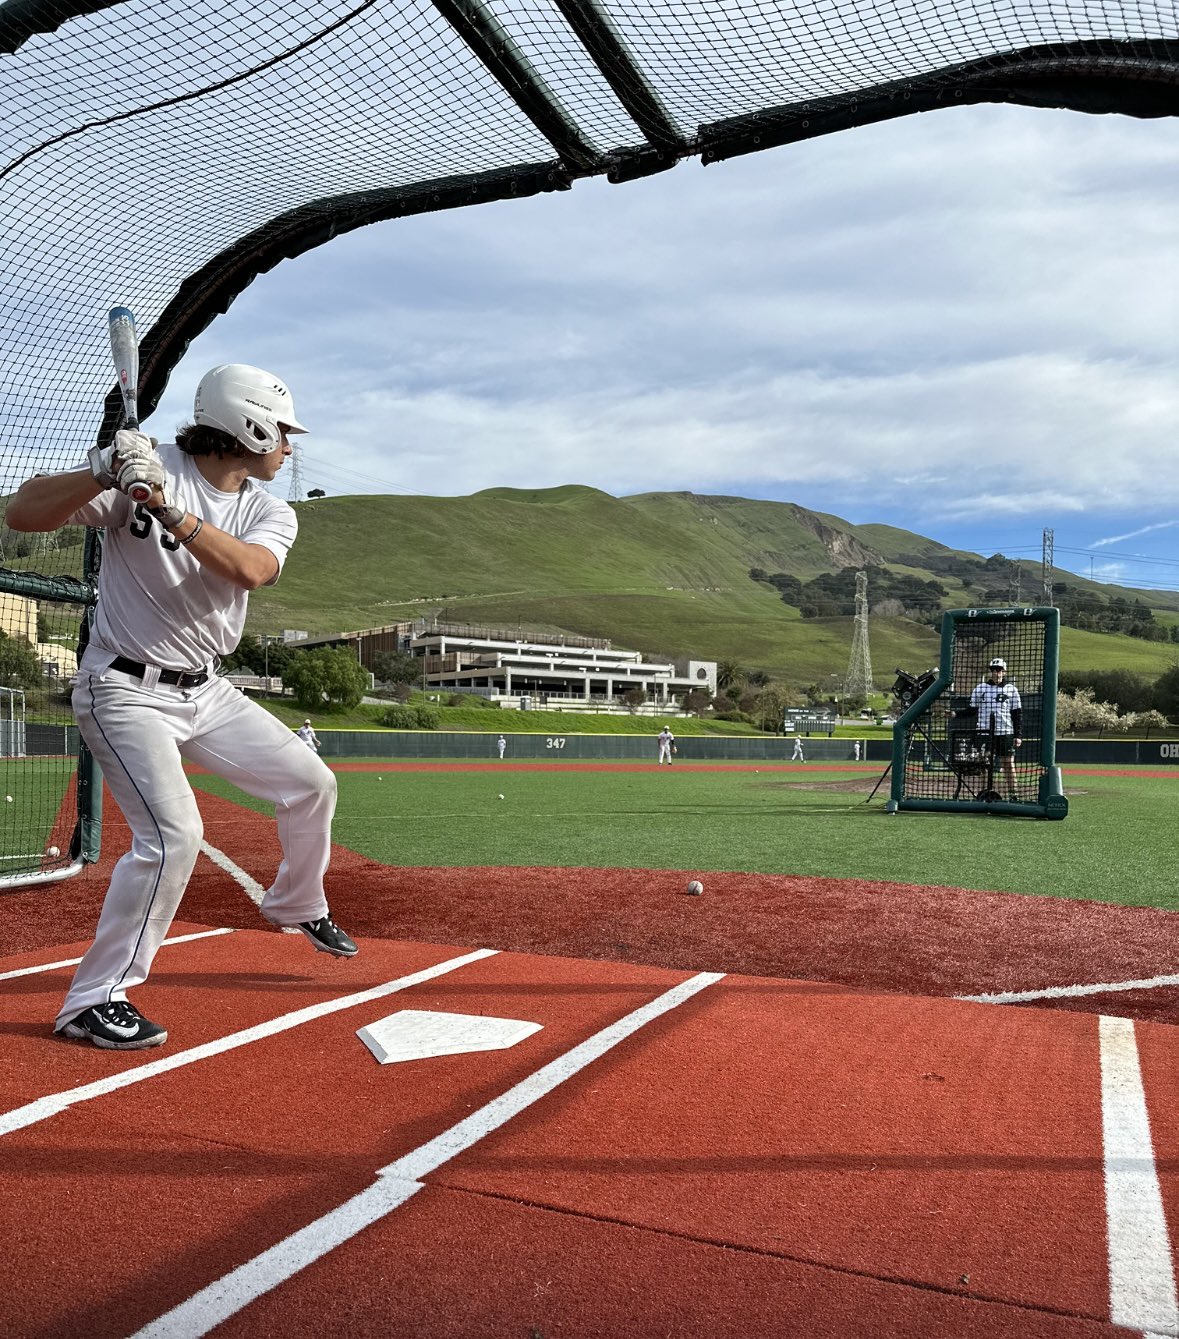 After another Final Four run in 2022, Ohlone will feature many new faces in the 2023, including Nino Vultaggio, who played last season at NCAA Division I, CSU Bakersfield.  Vultaggio looks to hit in the middle of the order in '23.